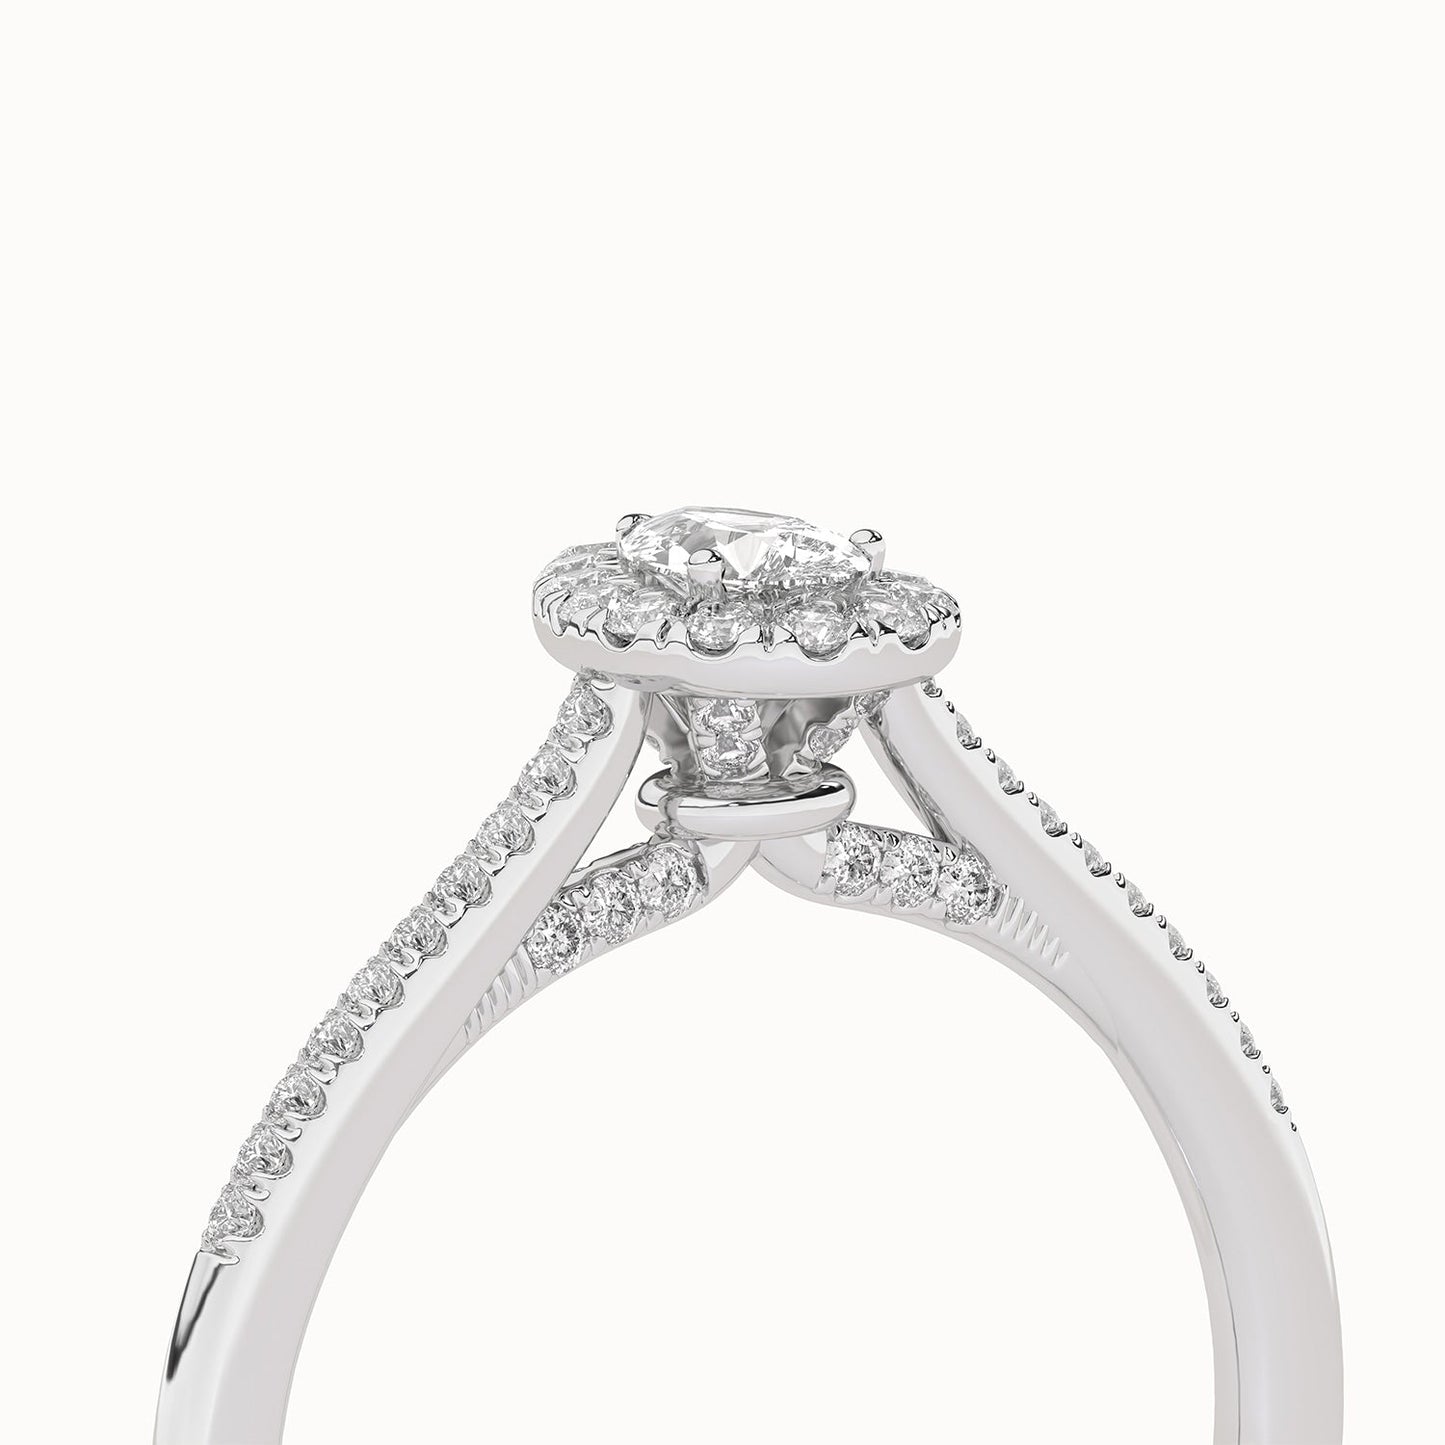 Signature Dewdrop Halo Ring_Product Angle_1/3Ct - 5